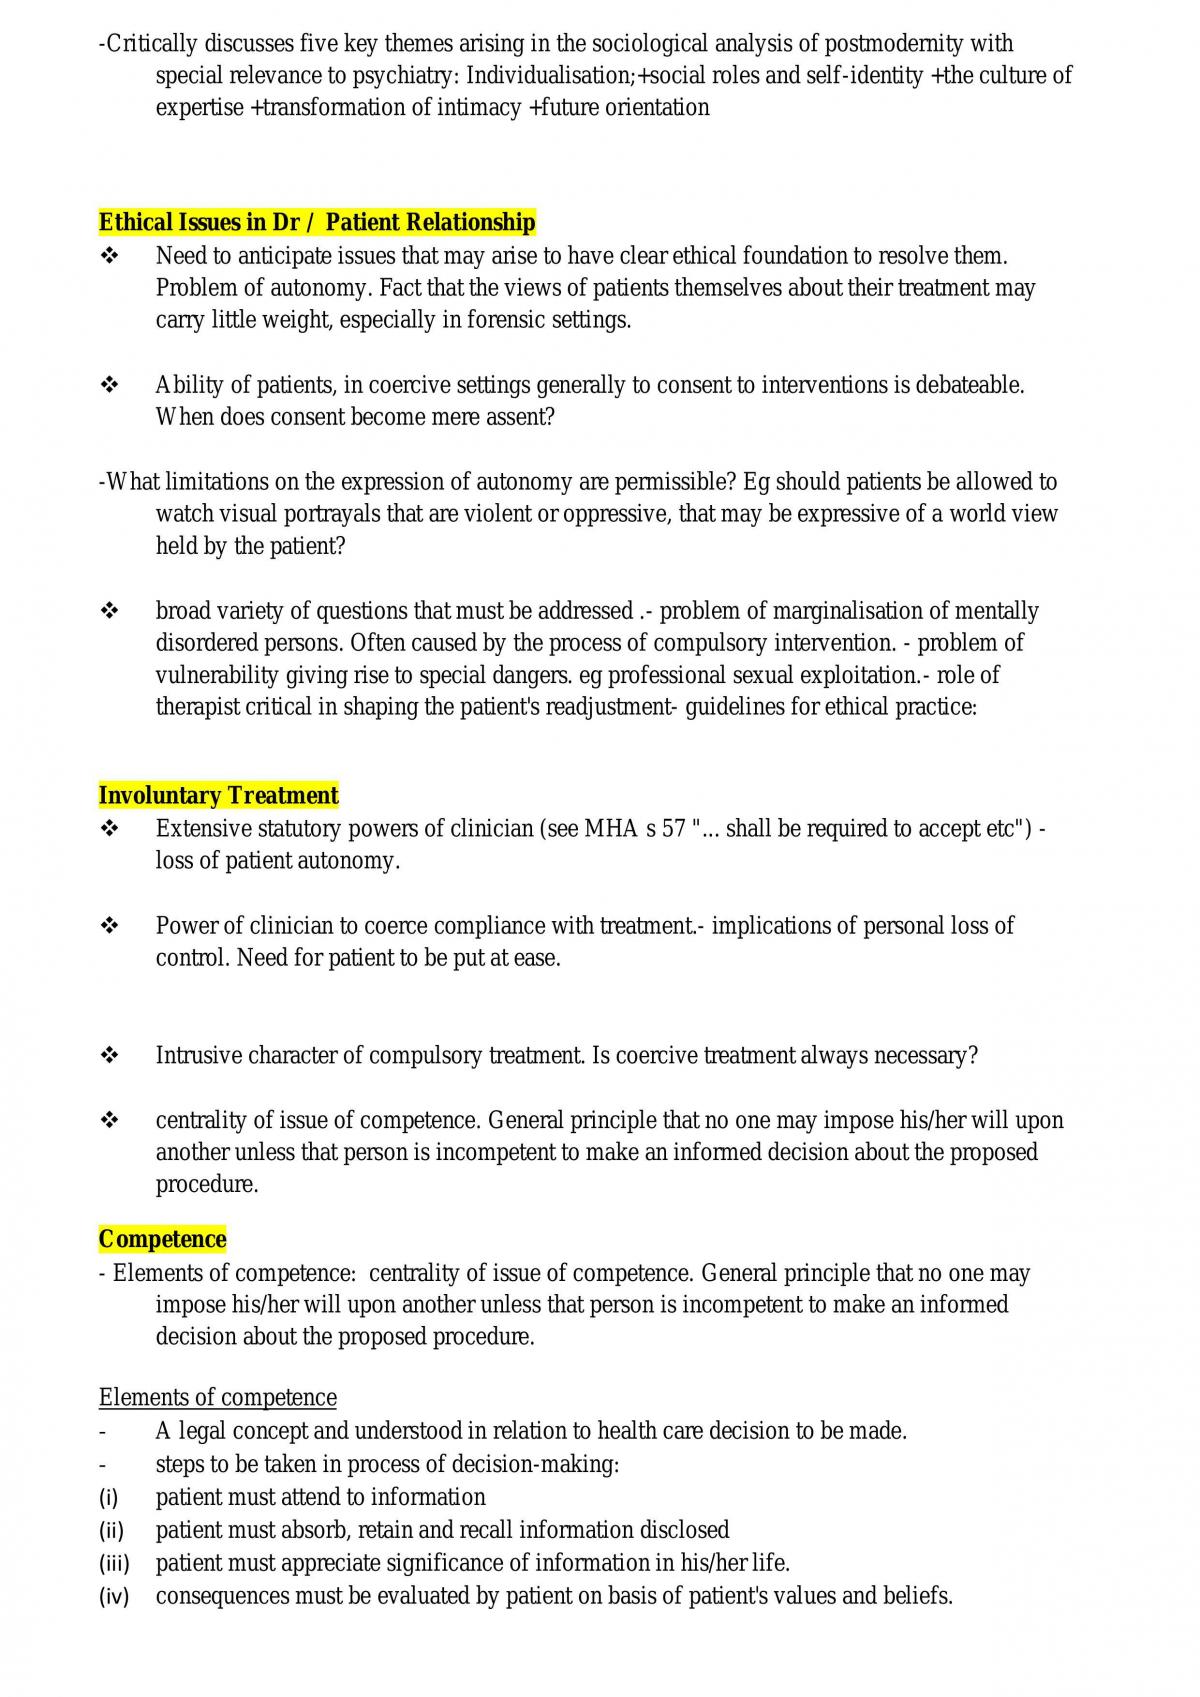 Law and Psychiatry Week 1 to Week 10 - Page 1